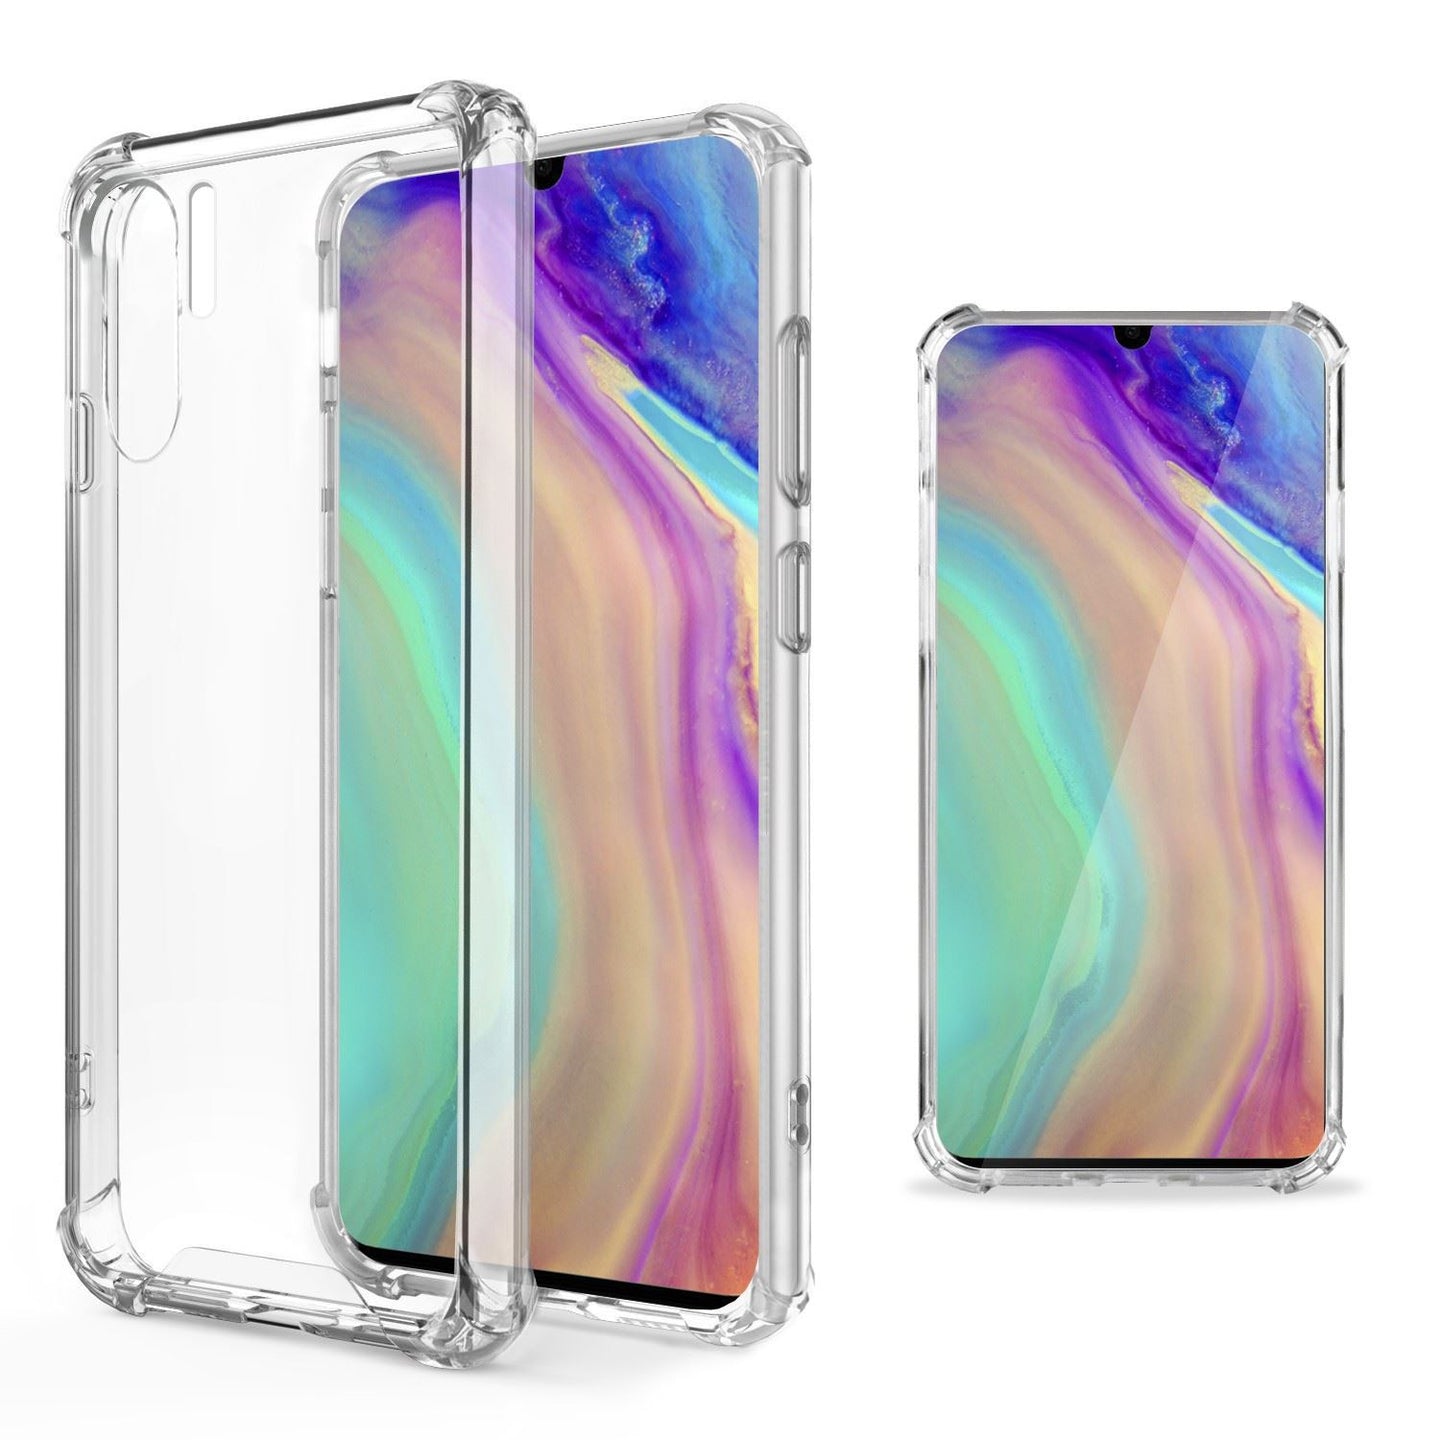 Moozy Shock Proof Silicone Case for Huawei P30 Pro - Transparent Crystal Clear Phone Case Soft TPU Cover